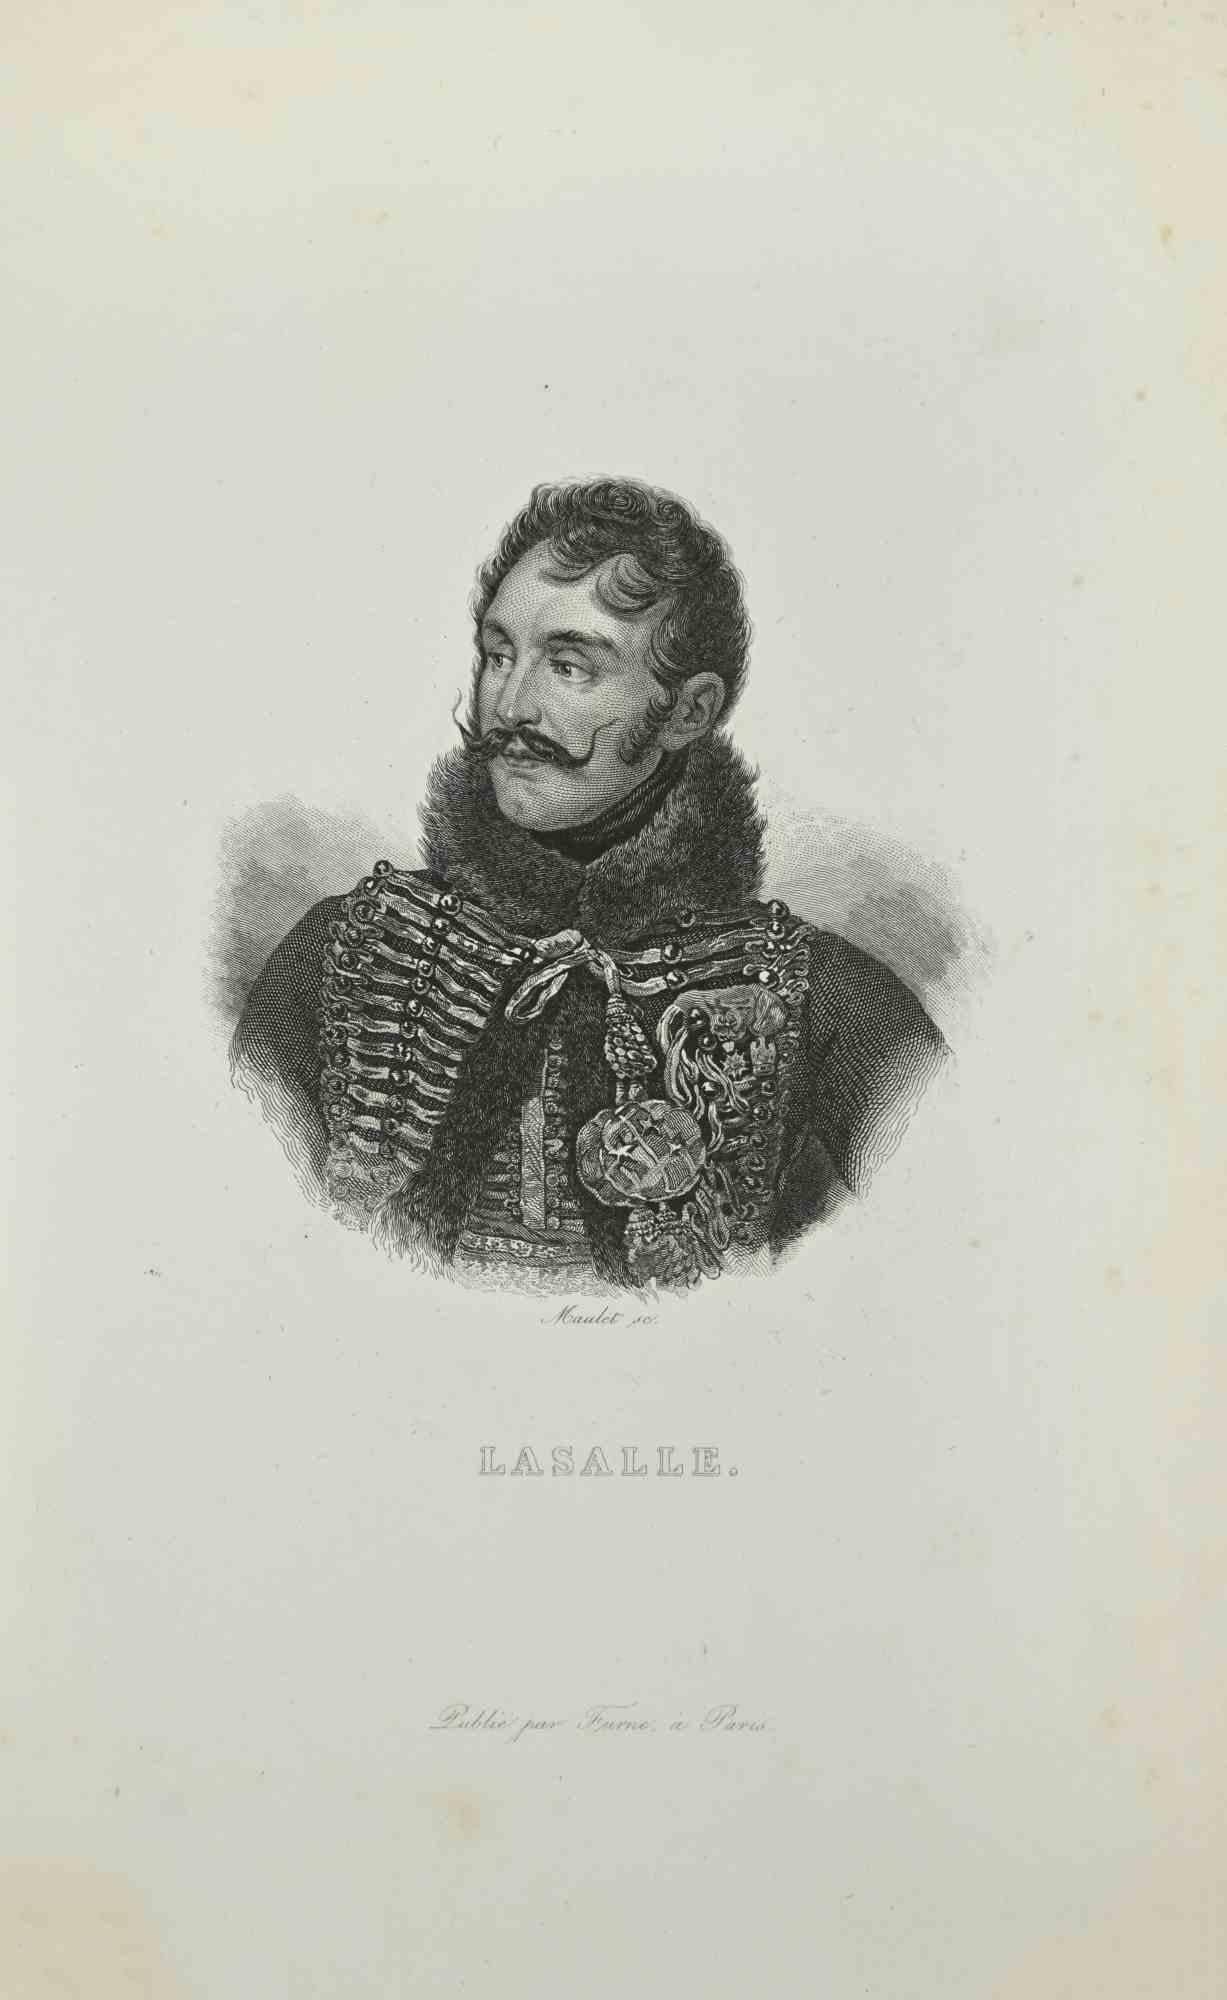 Lasalle - Etching by Amédée Maulet - 1837